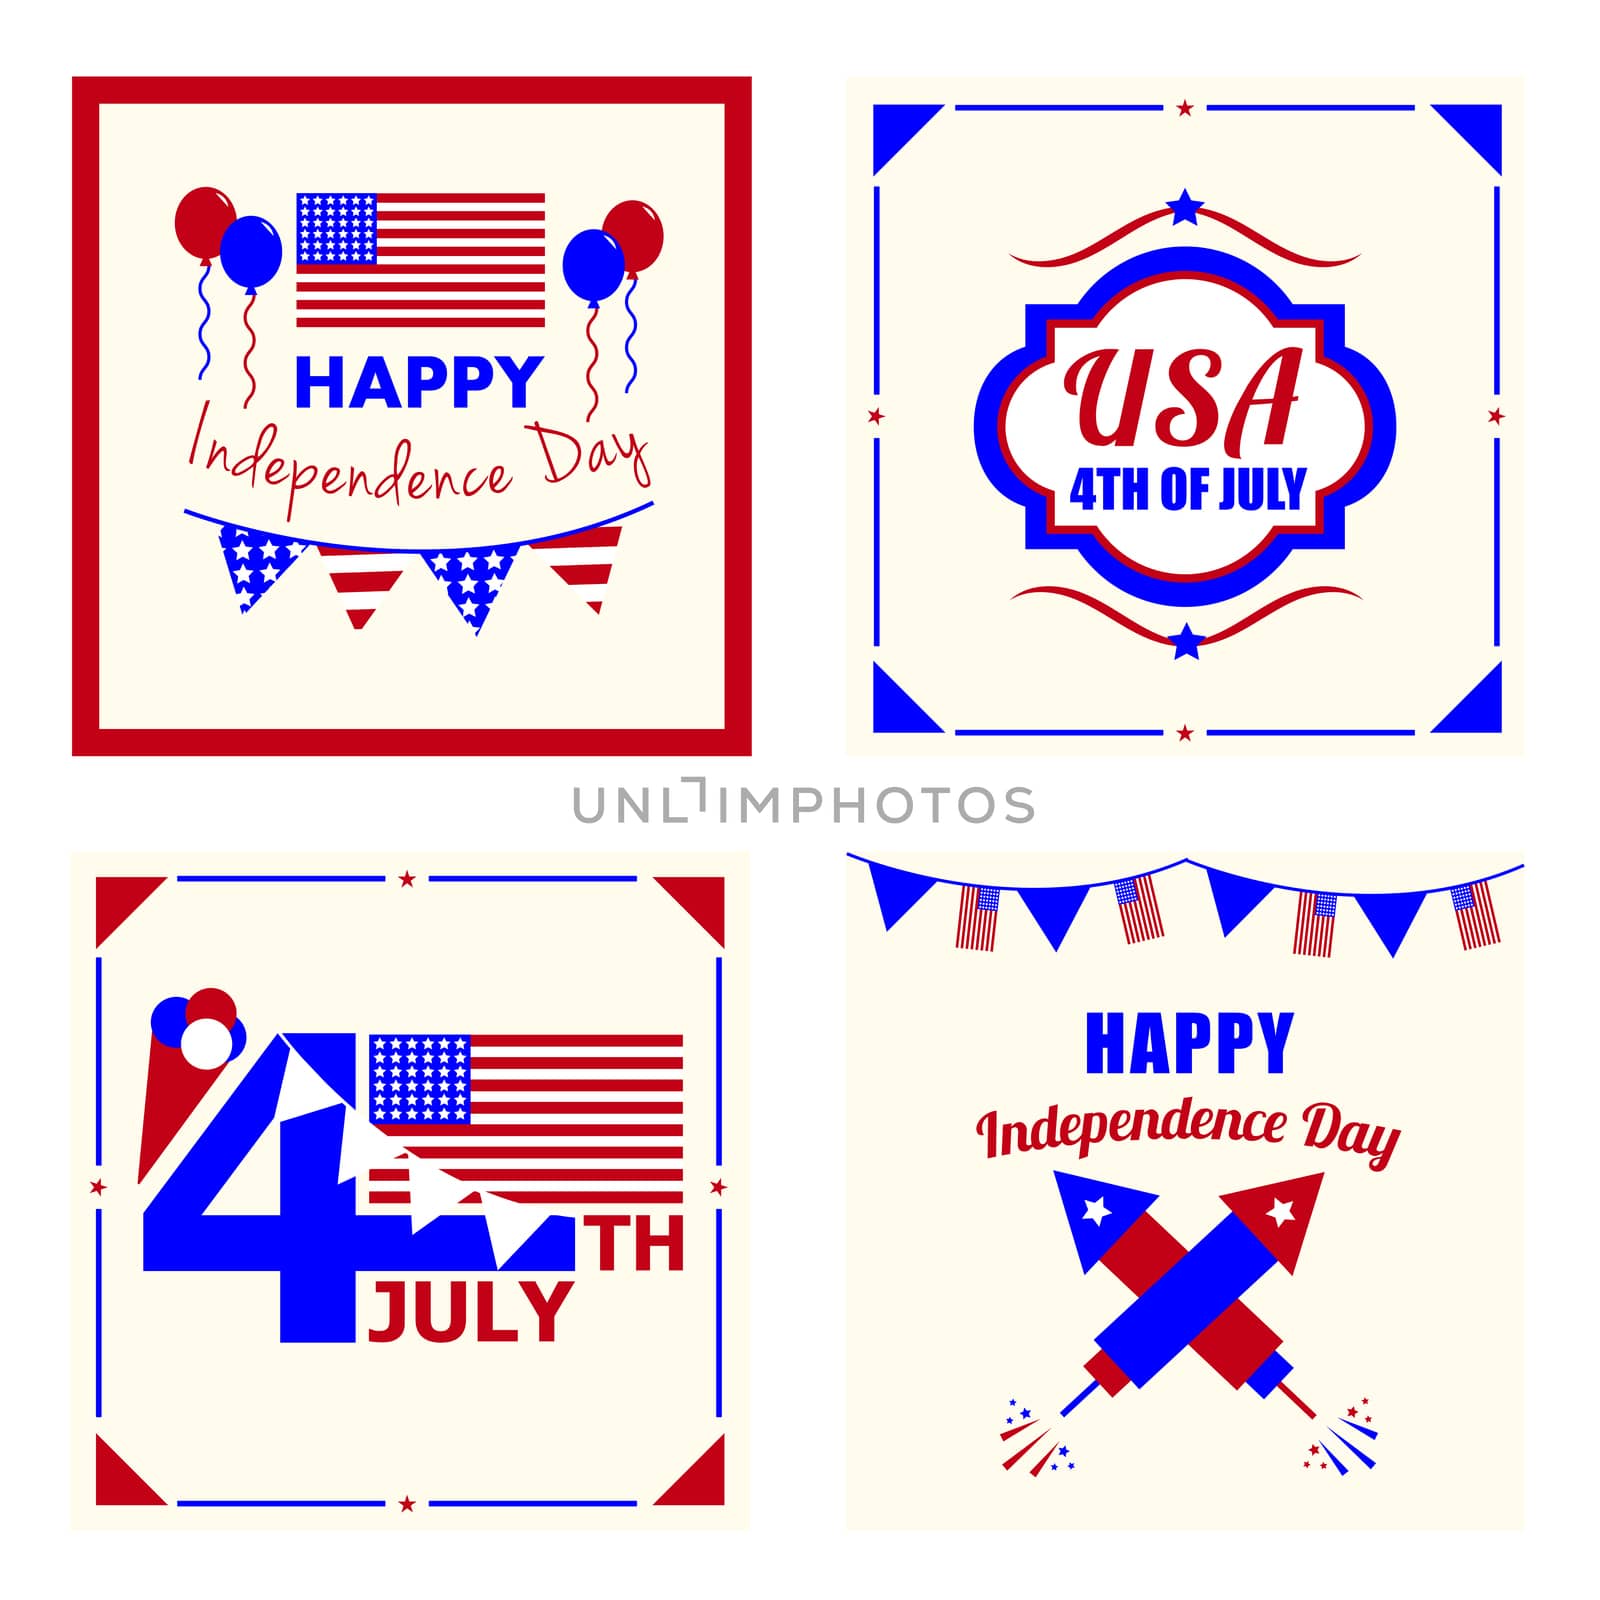 Card with happy independence day text against white background